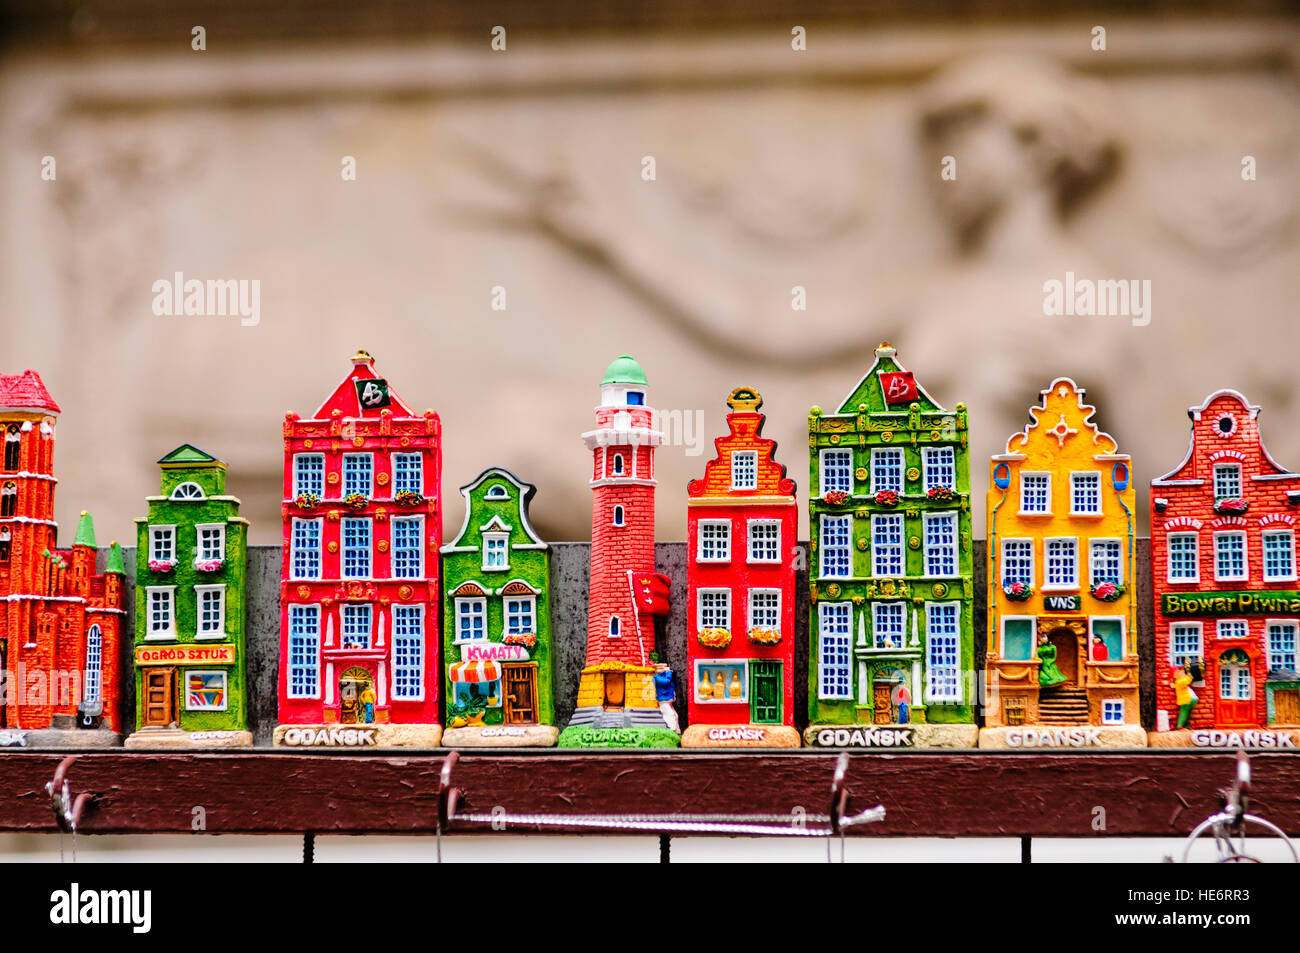 Colourful fridge magnets in the shape of buildings in Gdansk, Stock Photo